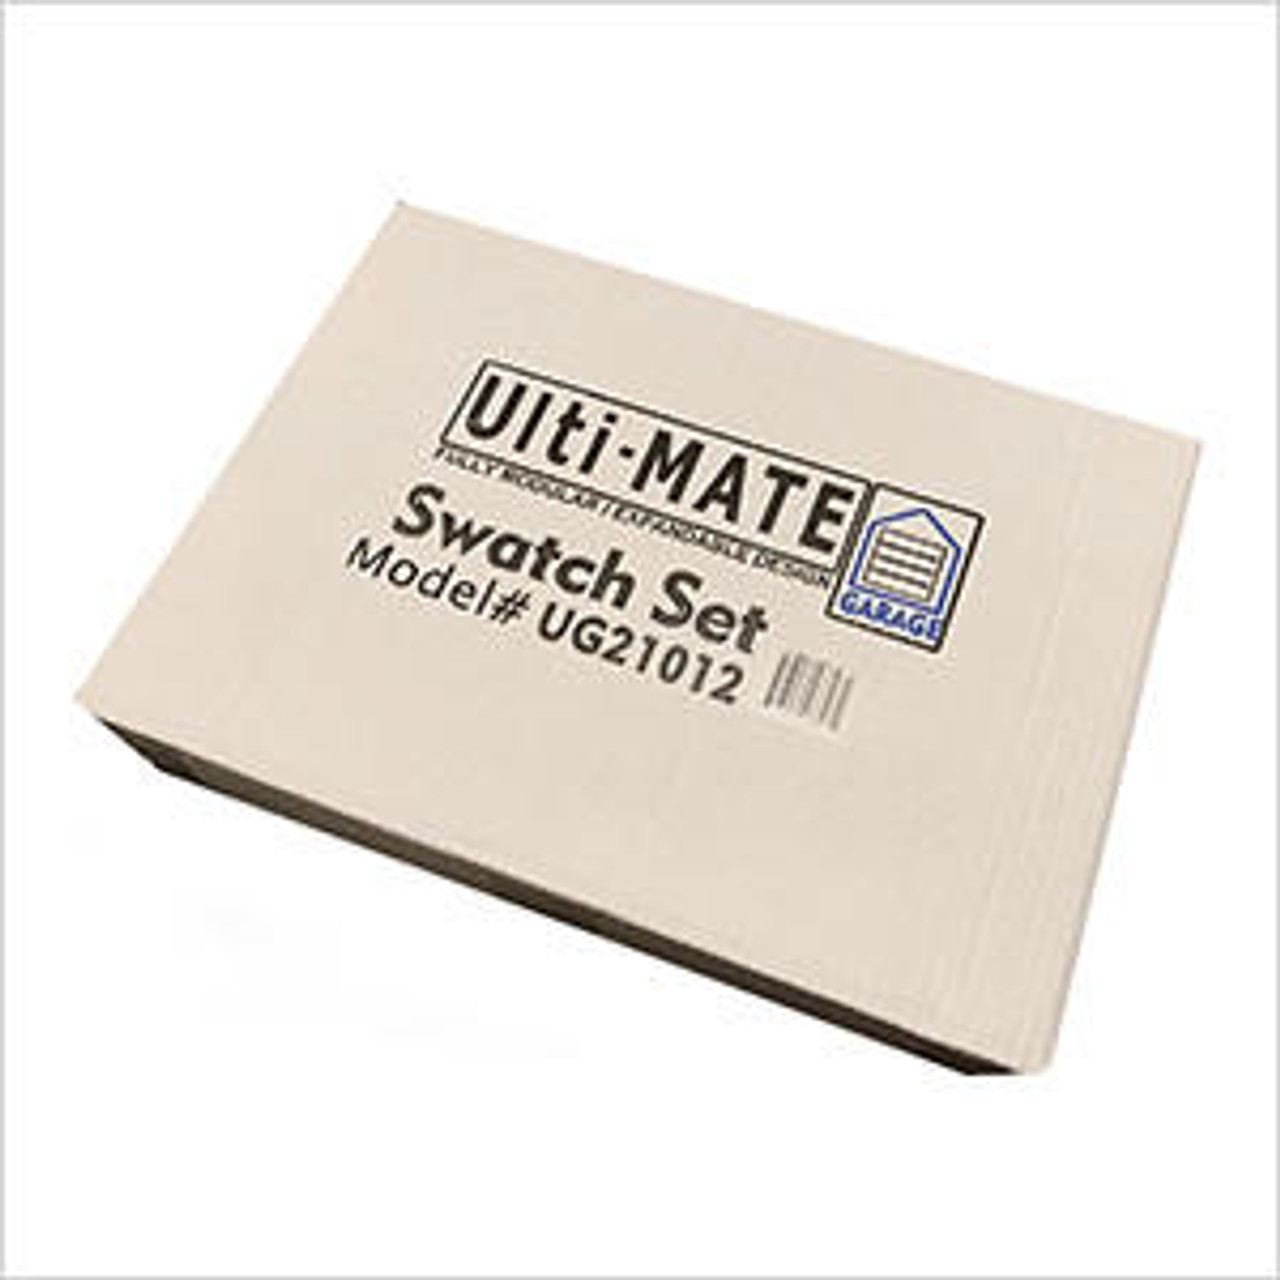 UltiMate Ulti-Mate Cabinet Sample Swatches